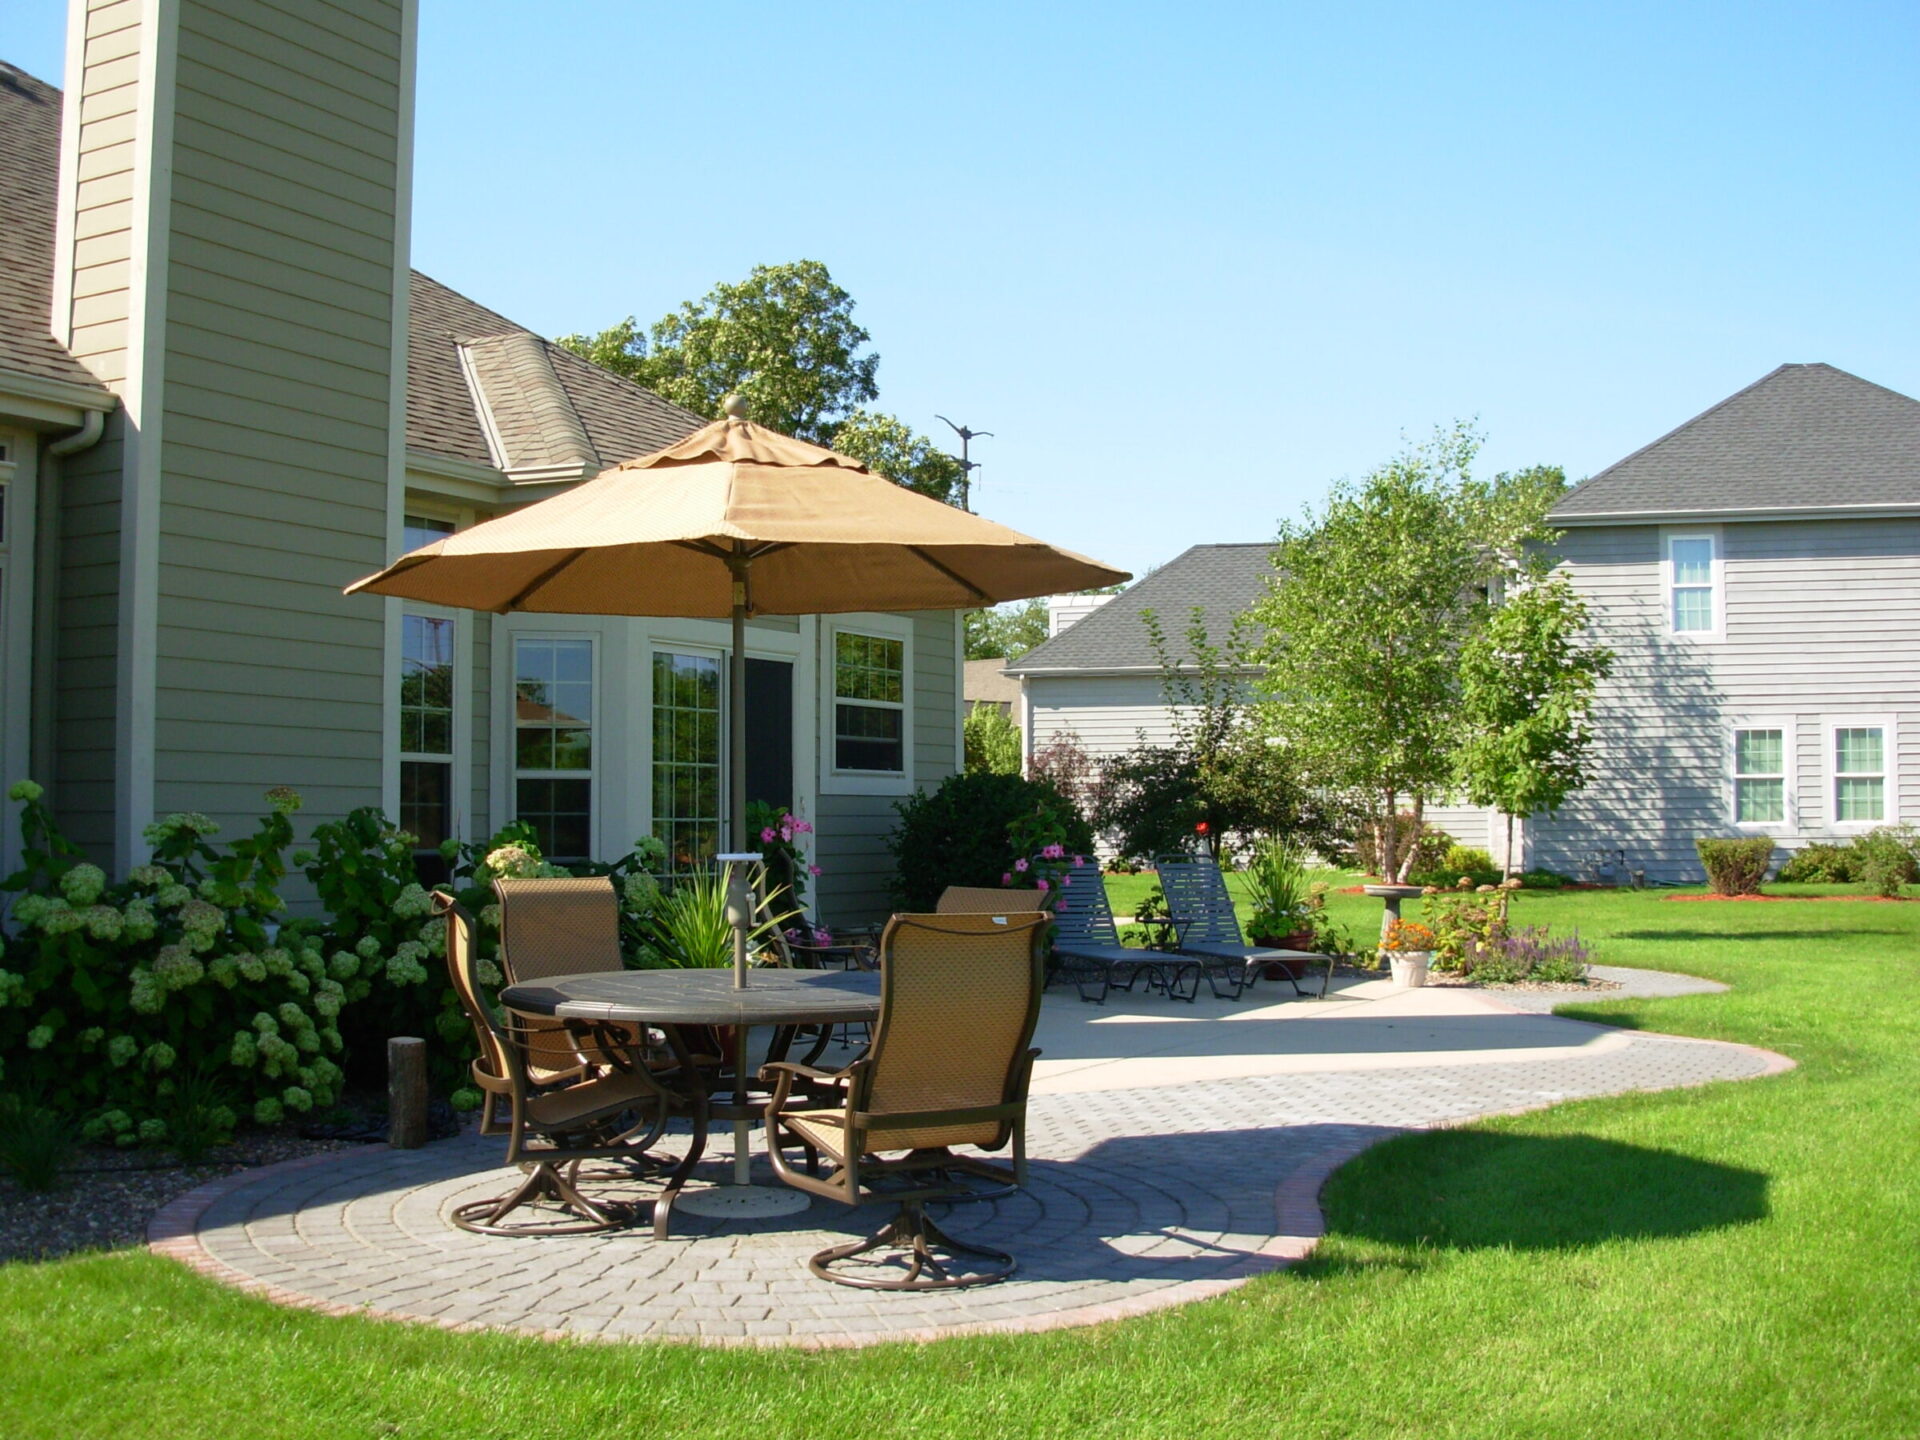 A sunny backyard with a patio dining set under an umbrella, surrounded by manicured grass, landscaped plants, and suburban homes.